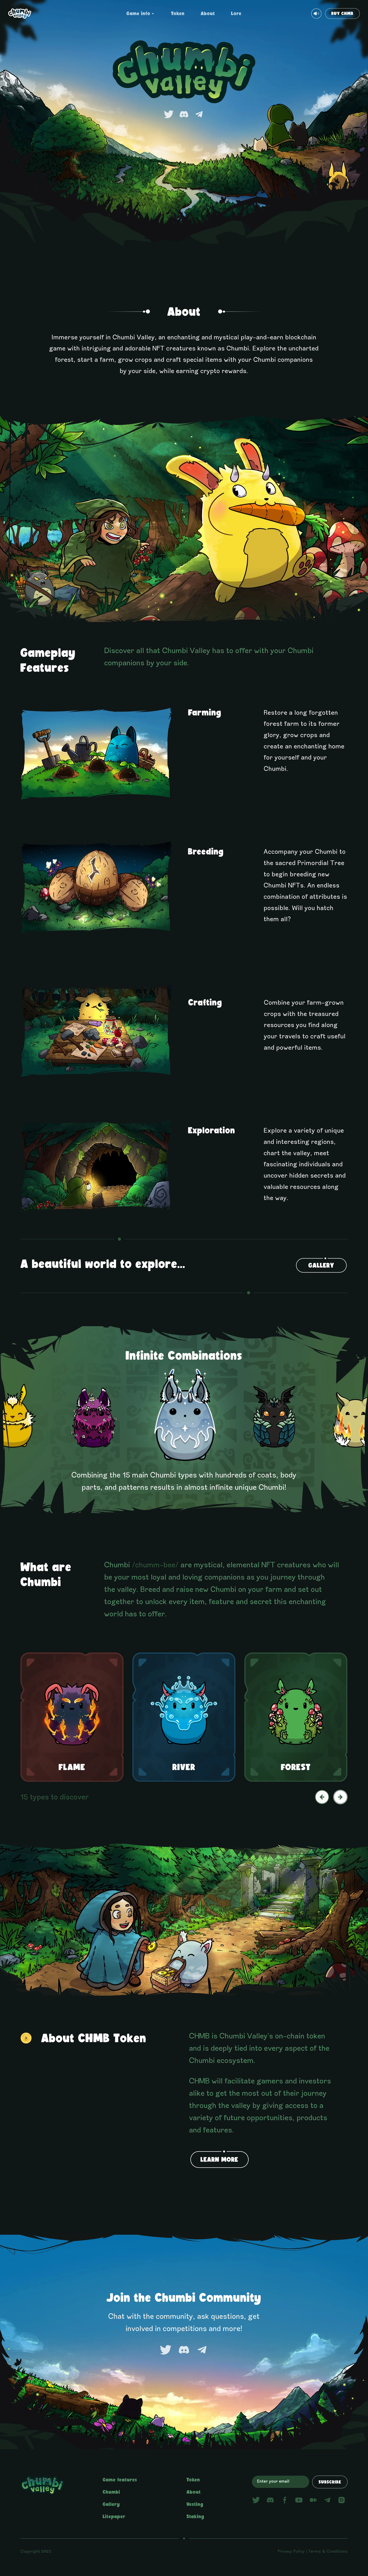 Chumbi Valley Landing Page Example: Explore a mystical forest valley & spend many relaxing hours raising adorable NFT creatures called Chumbi.